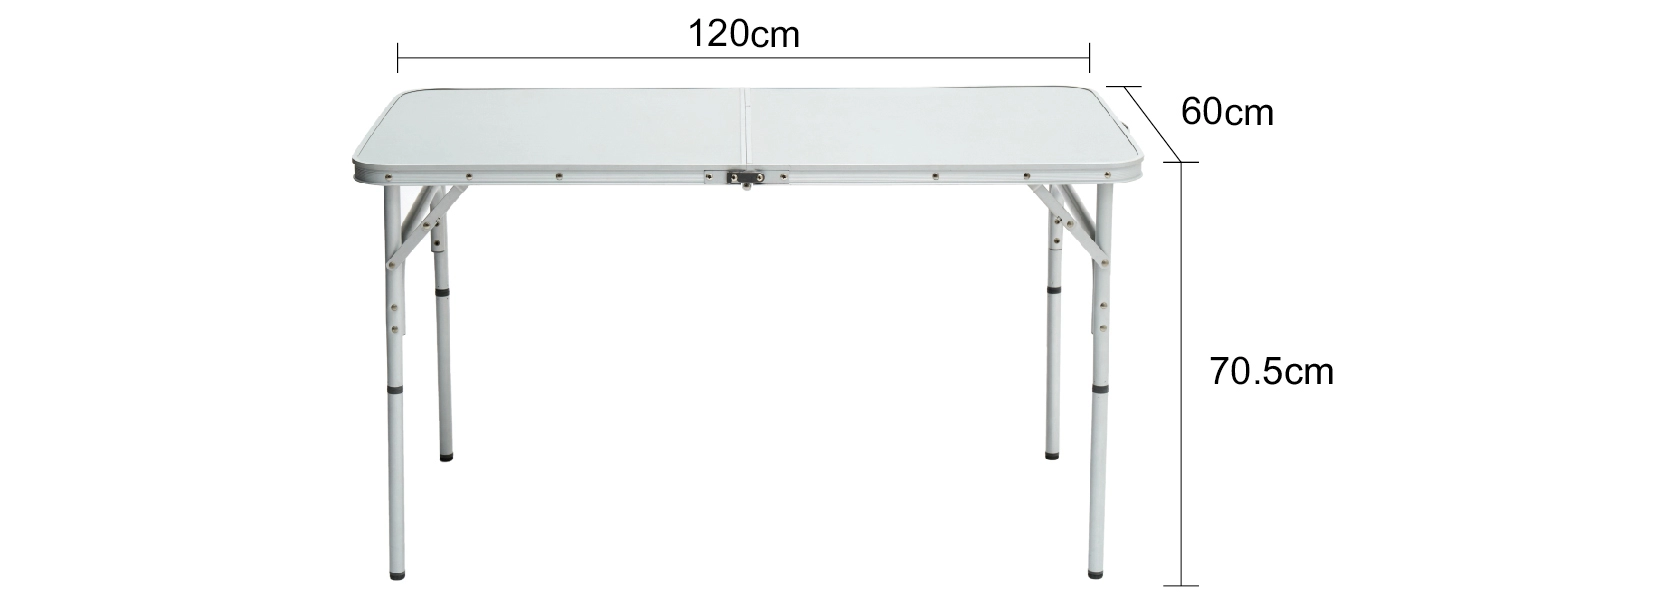 details of Height Adjustable Aluminum Folding Table with MDF Table Top for Camping Picnic and Garden BBQ Party